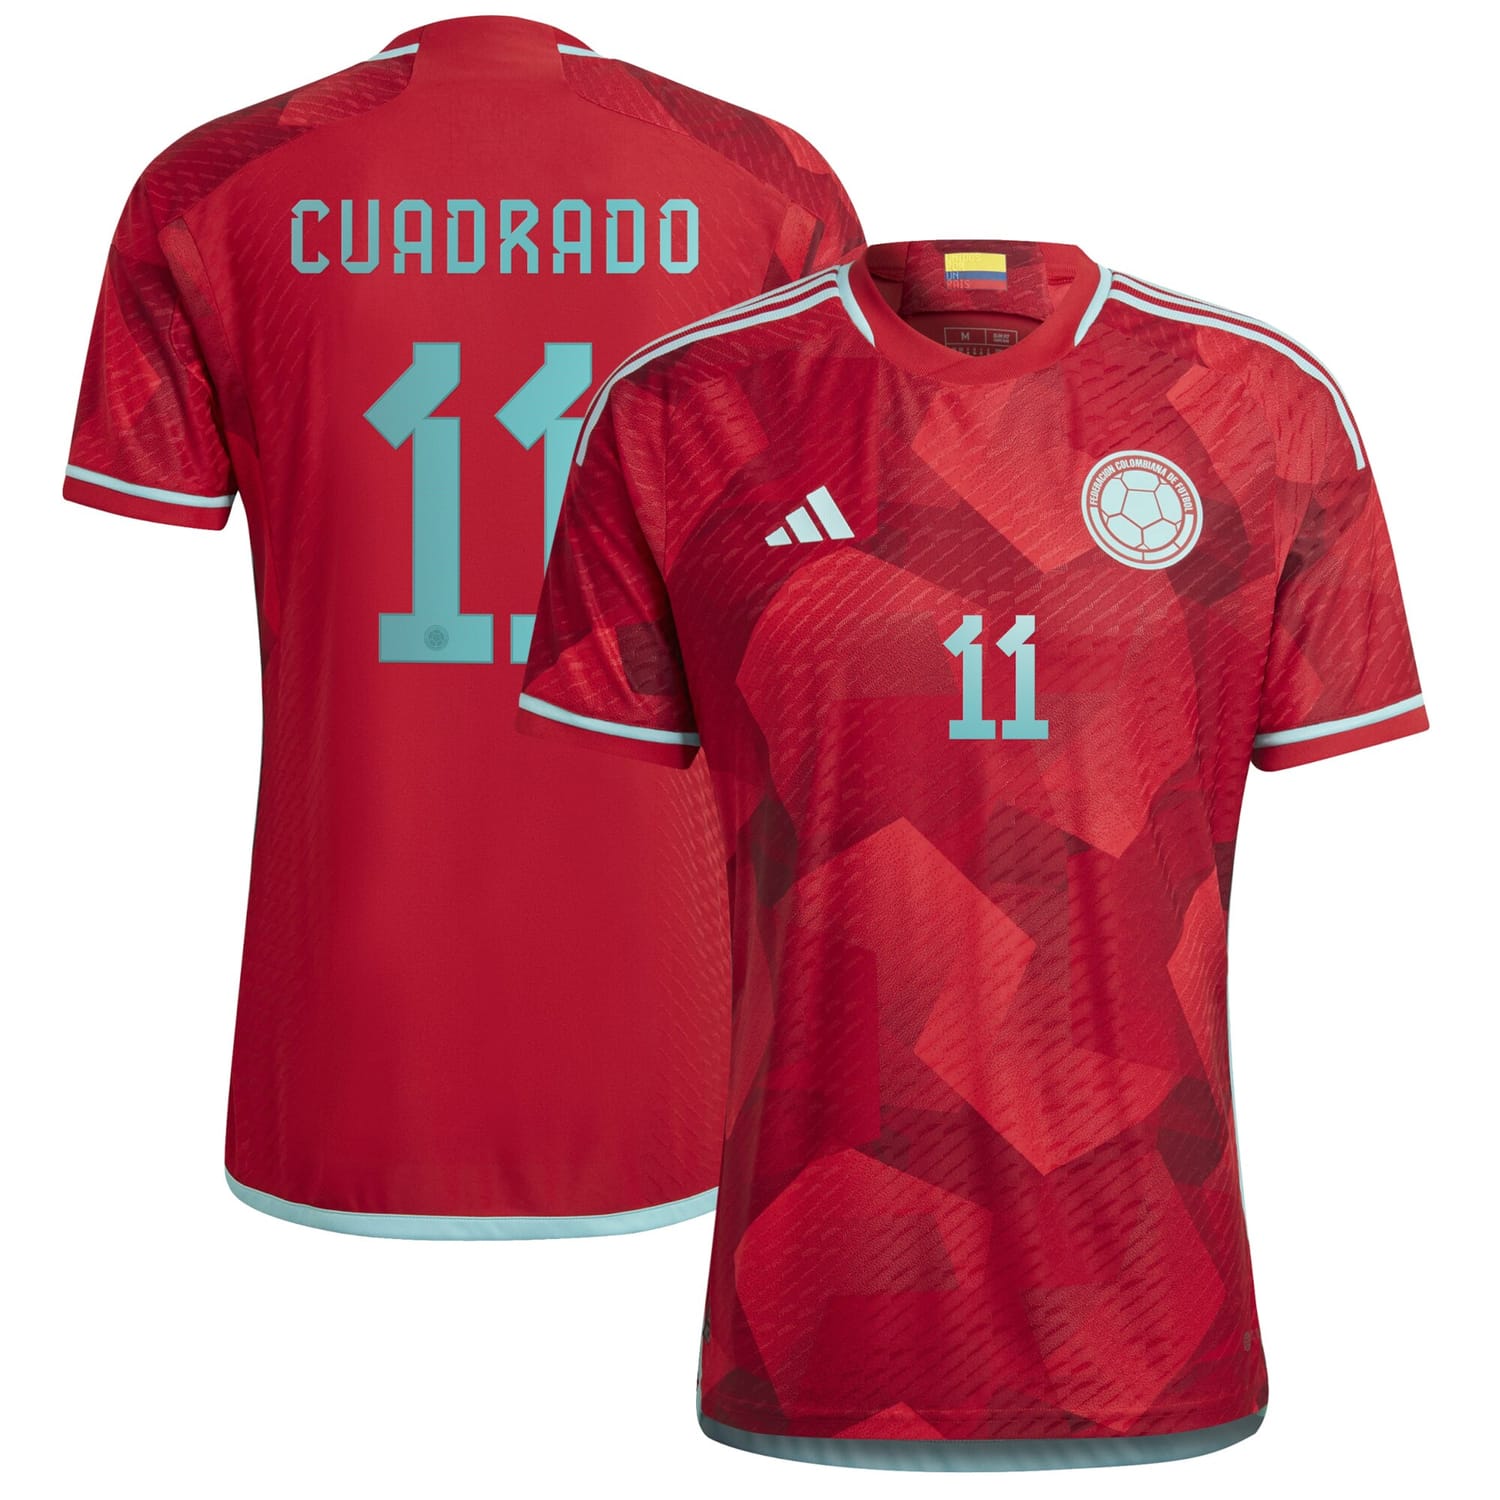 Colombia National Team Away Authentic Jersey Shirt Red 2022-23 player Juan Cuadrado printing for Men